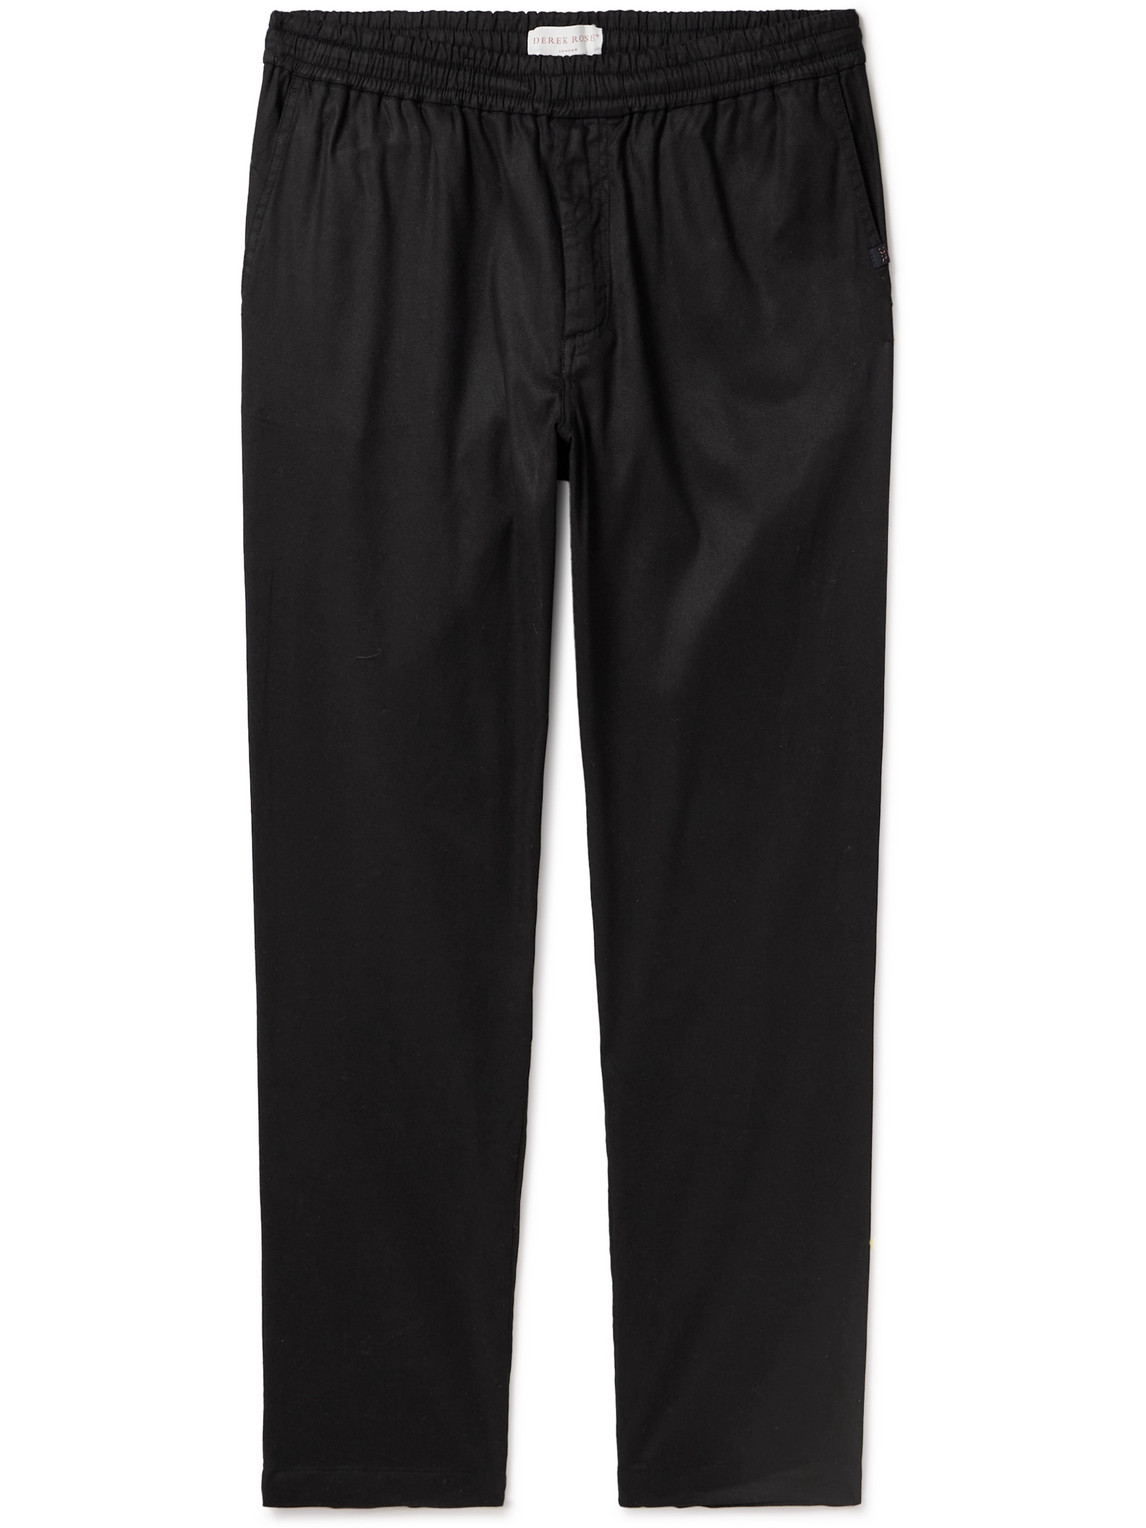 Quinn Slim-Fit Tapered Cotton and Modal-Blend Jersey Sweatpants